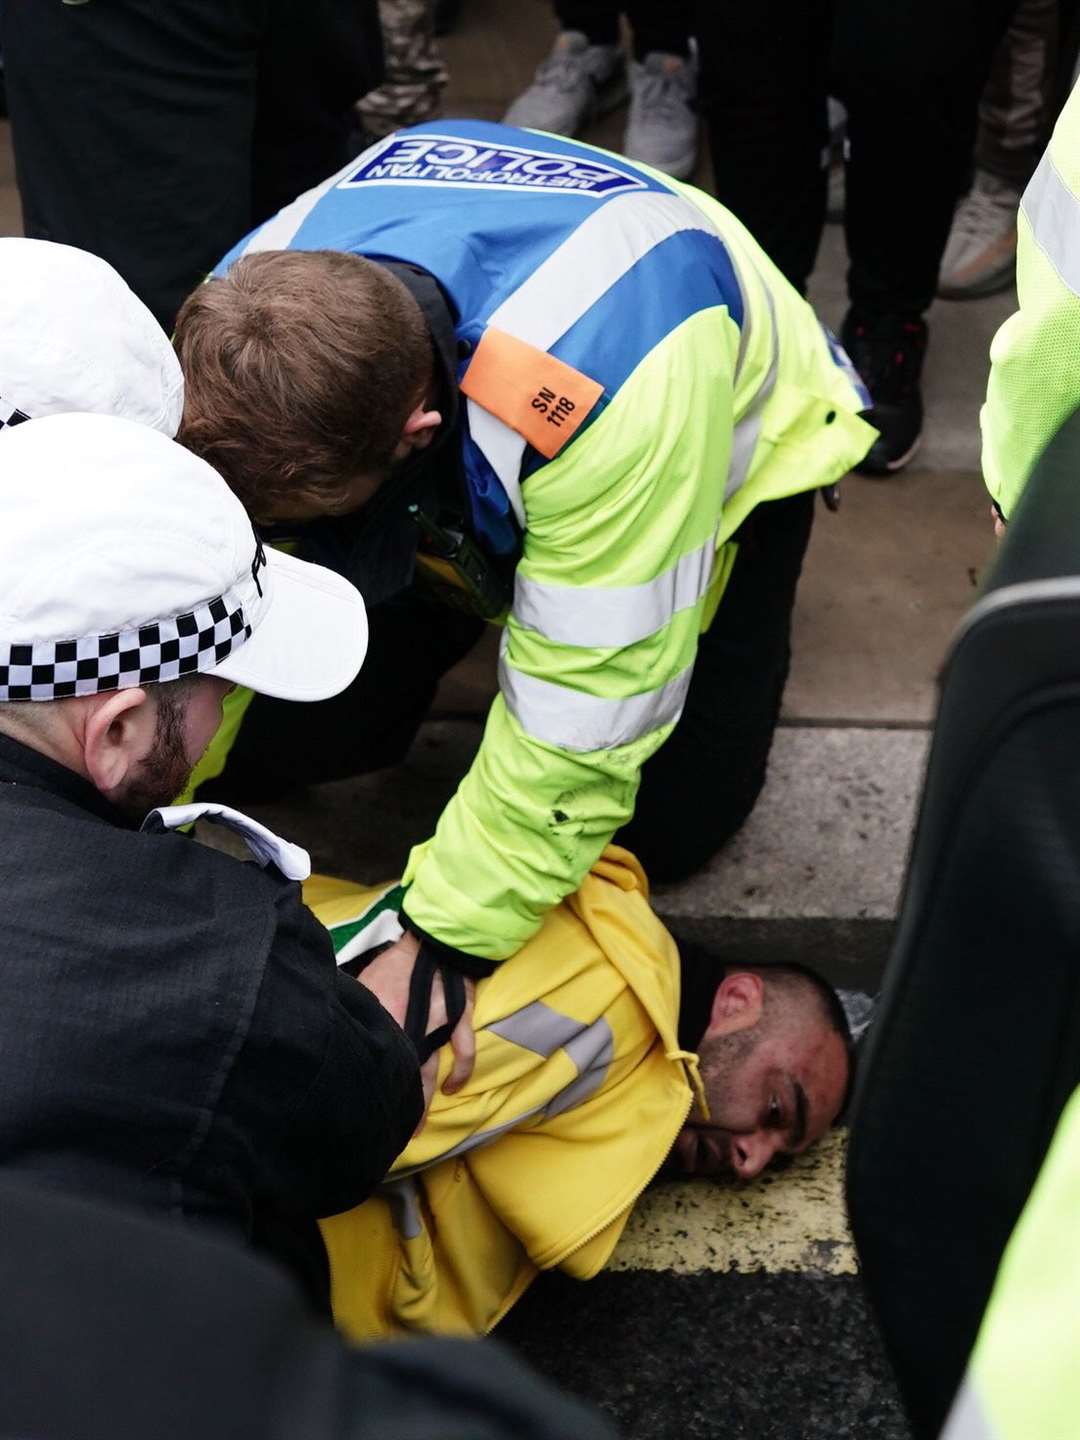 Police detain a man following scuffles between rival supporters as protesters walk past the Cenotaph on Whitehall (Jordan Pettitt/PA)